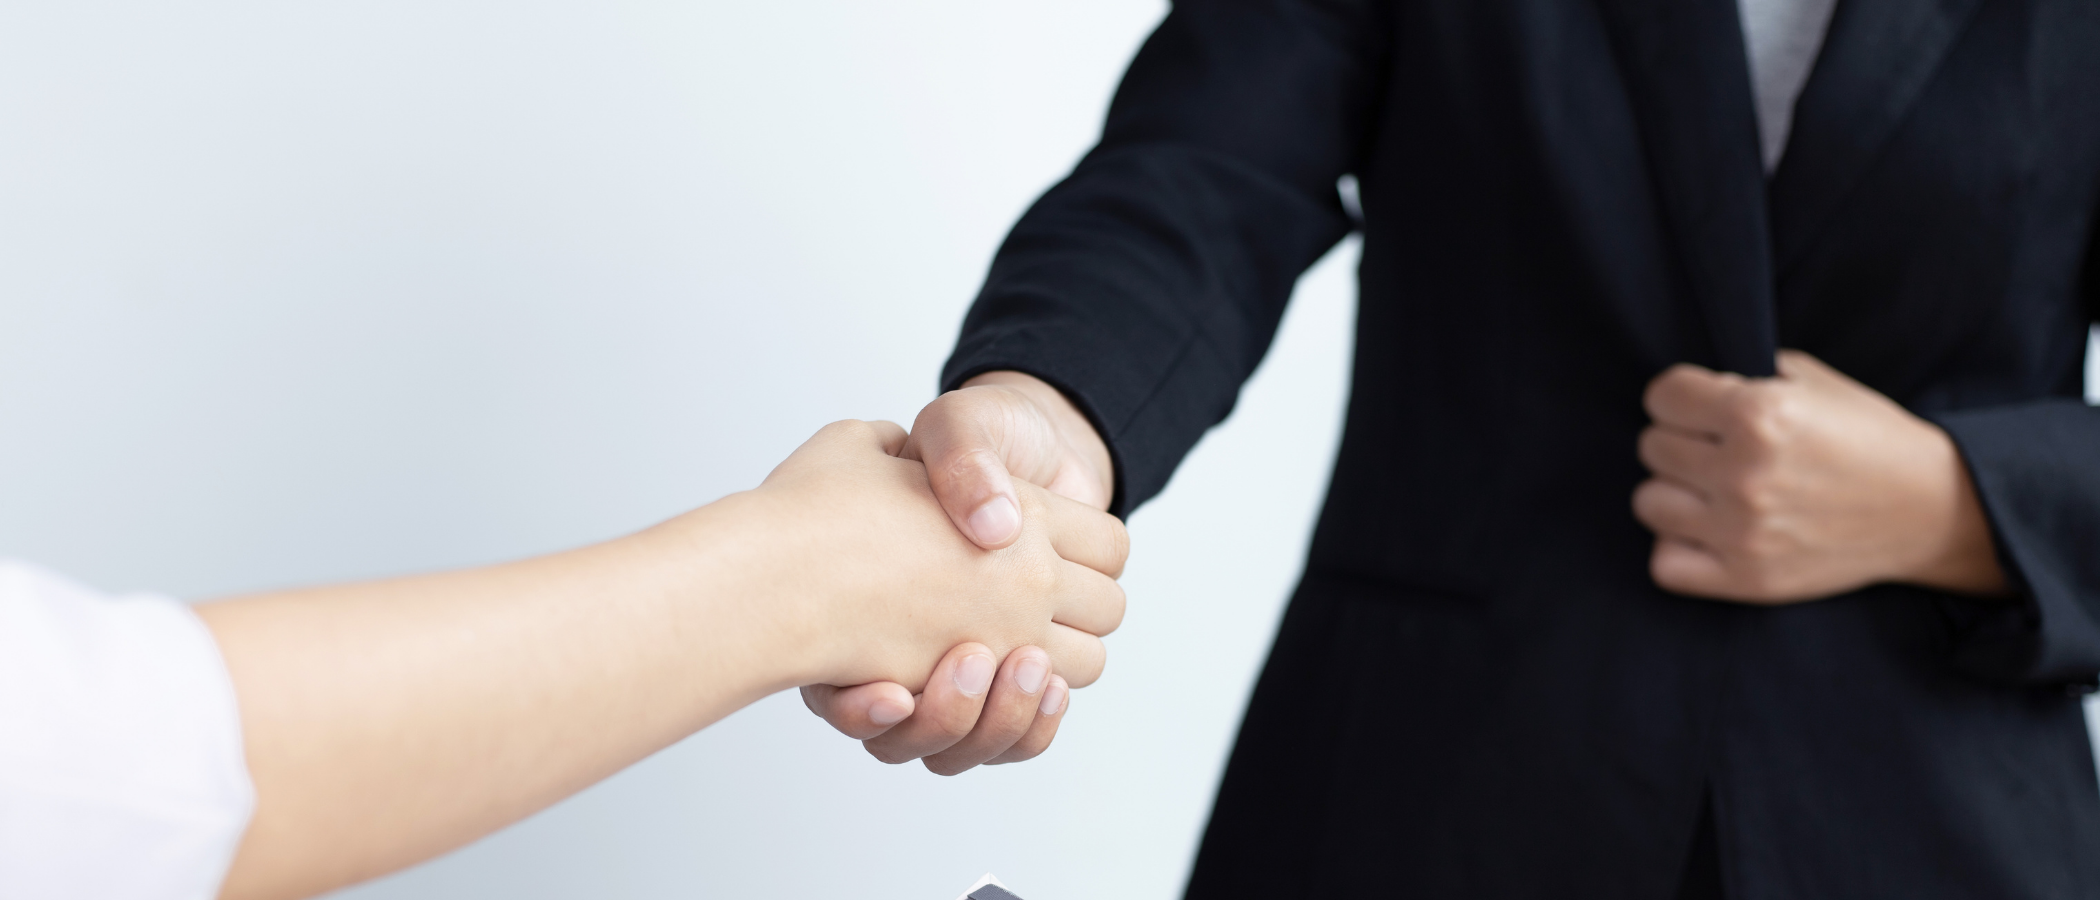 A paralegal and his client standing and having a firm handshake